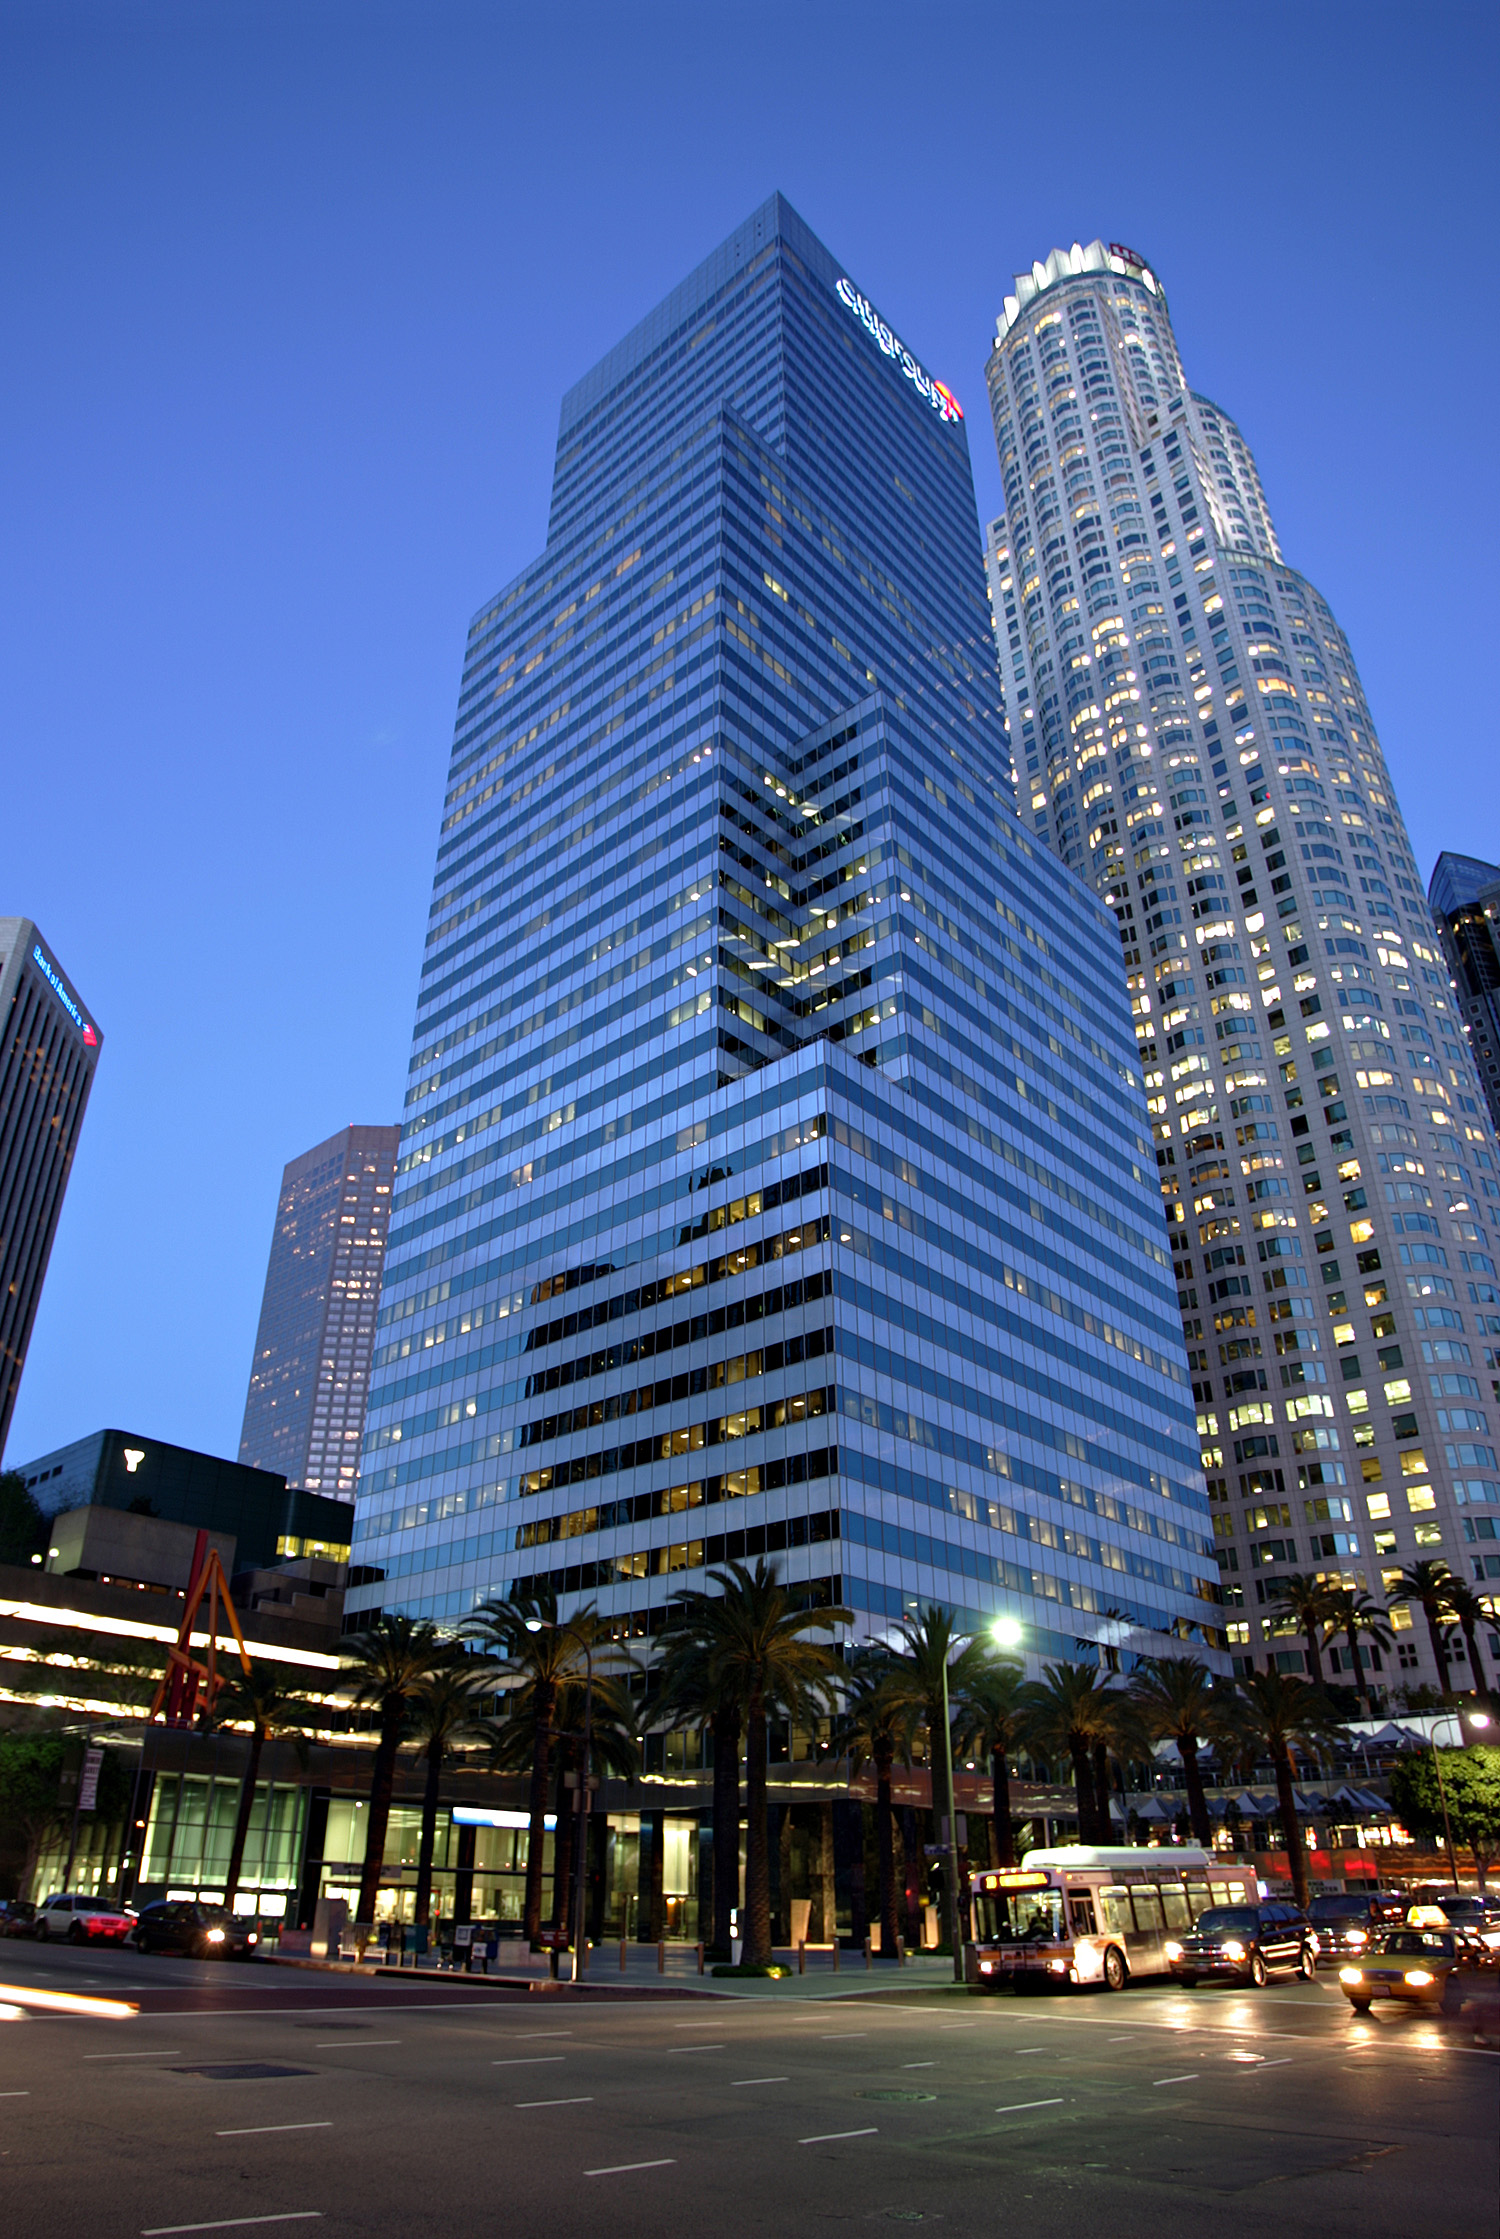 FourFortyFour South Flower, Los Angeles - Night view from the west. © Mathias Beinling